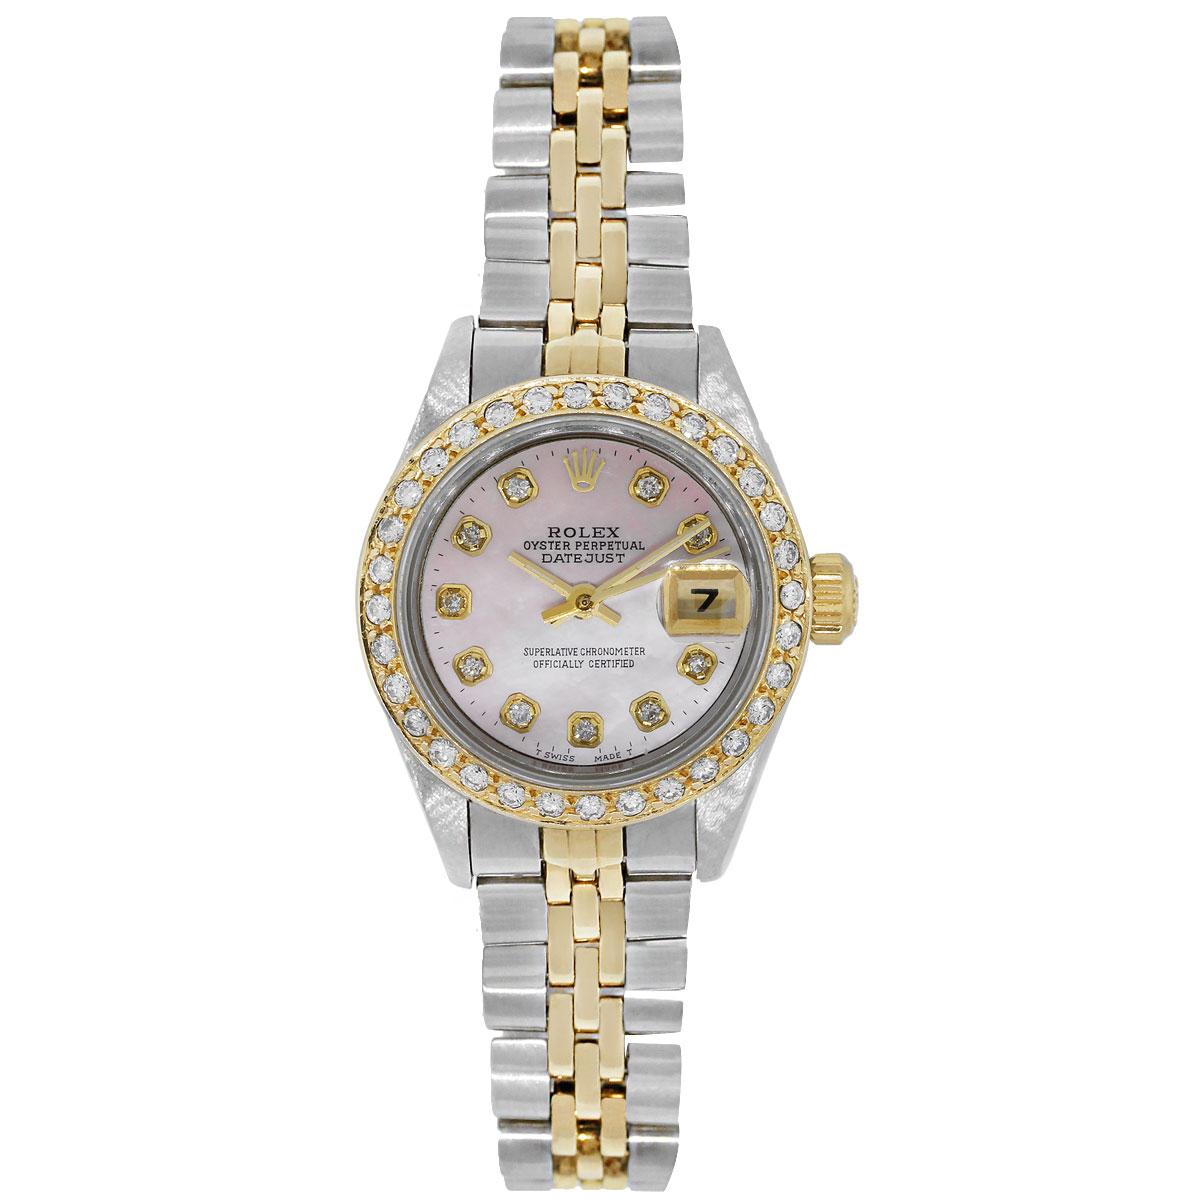 Brand: Rolex
MPN: 69173
Model: Datejust
Case Material: Stainless Steel and 18k yellow gold
Case Diameter: 26mm
Bezel: 18k Yellow gold diamond bezel
Dial: Pink pearl diamond dial with gold hour and minute hands. Date is displayed at the 3 o’clock